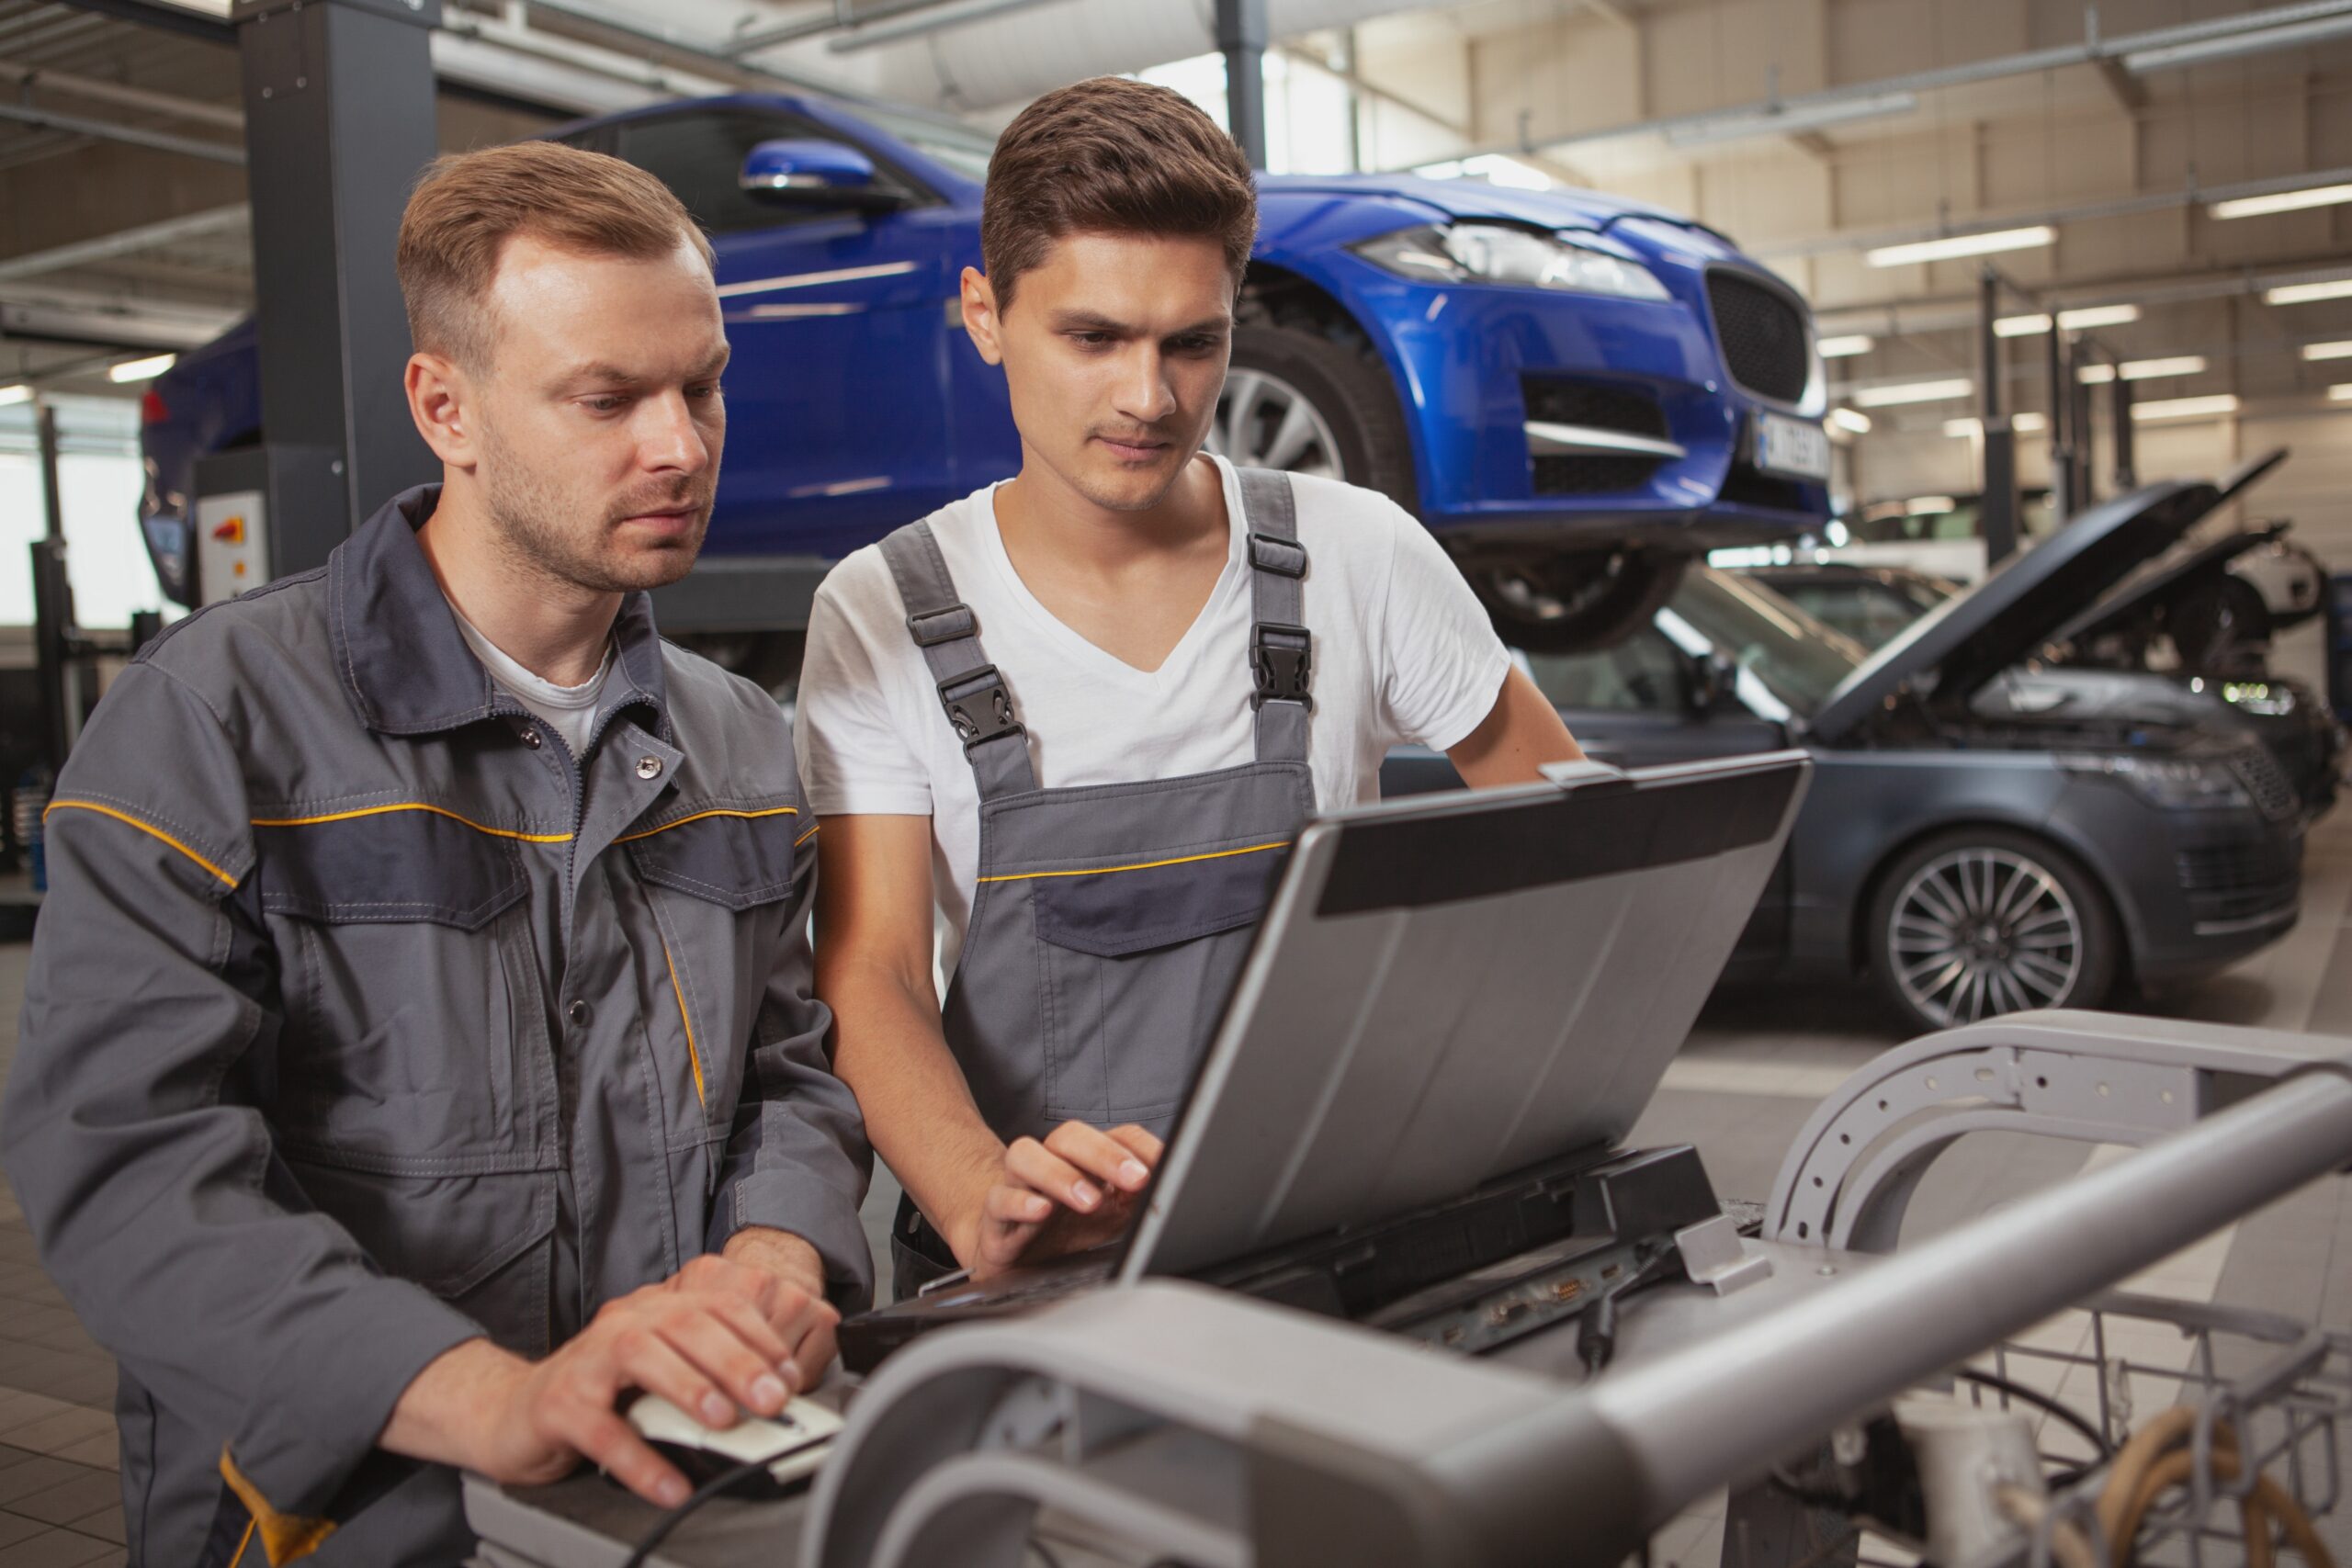 Two automotive technicians in a dealership service area using a computer to enhance customer experience, illustrating how better employee experience drives customer trust and loyalty